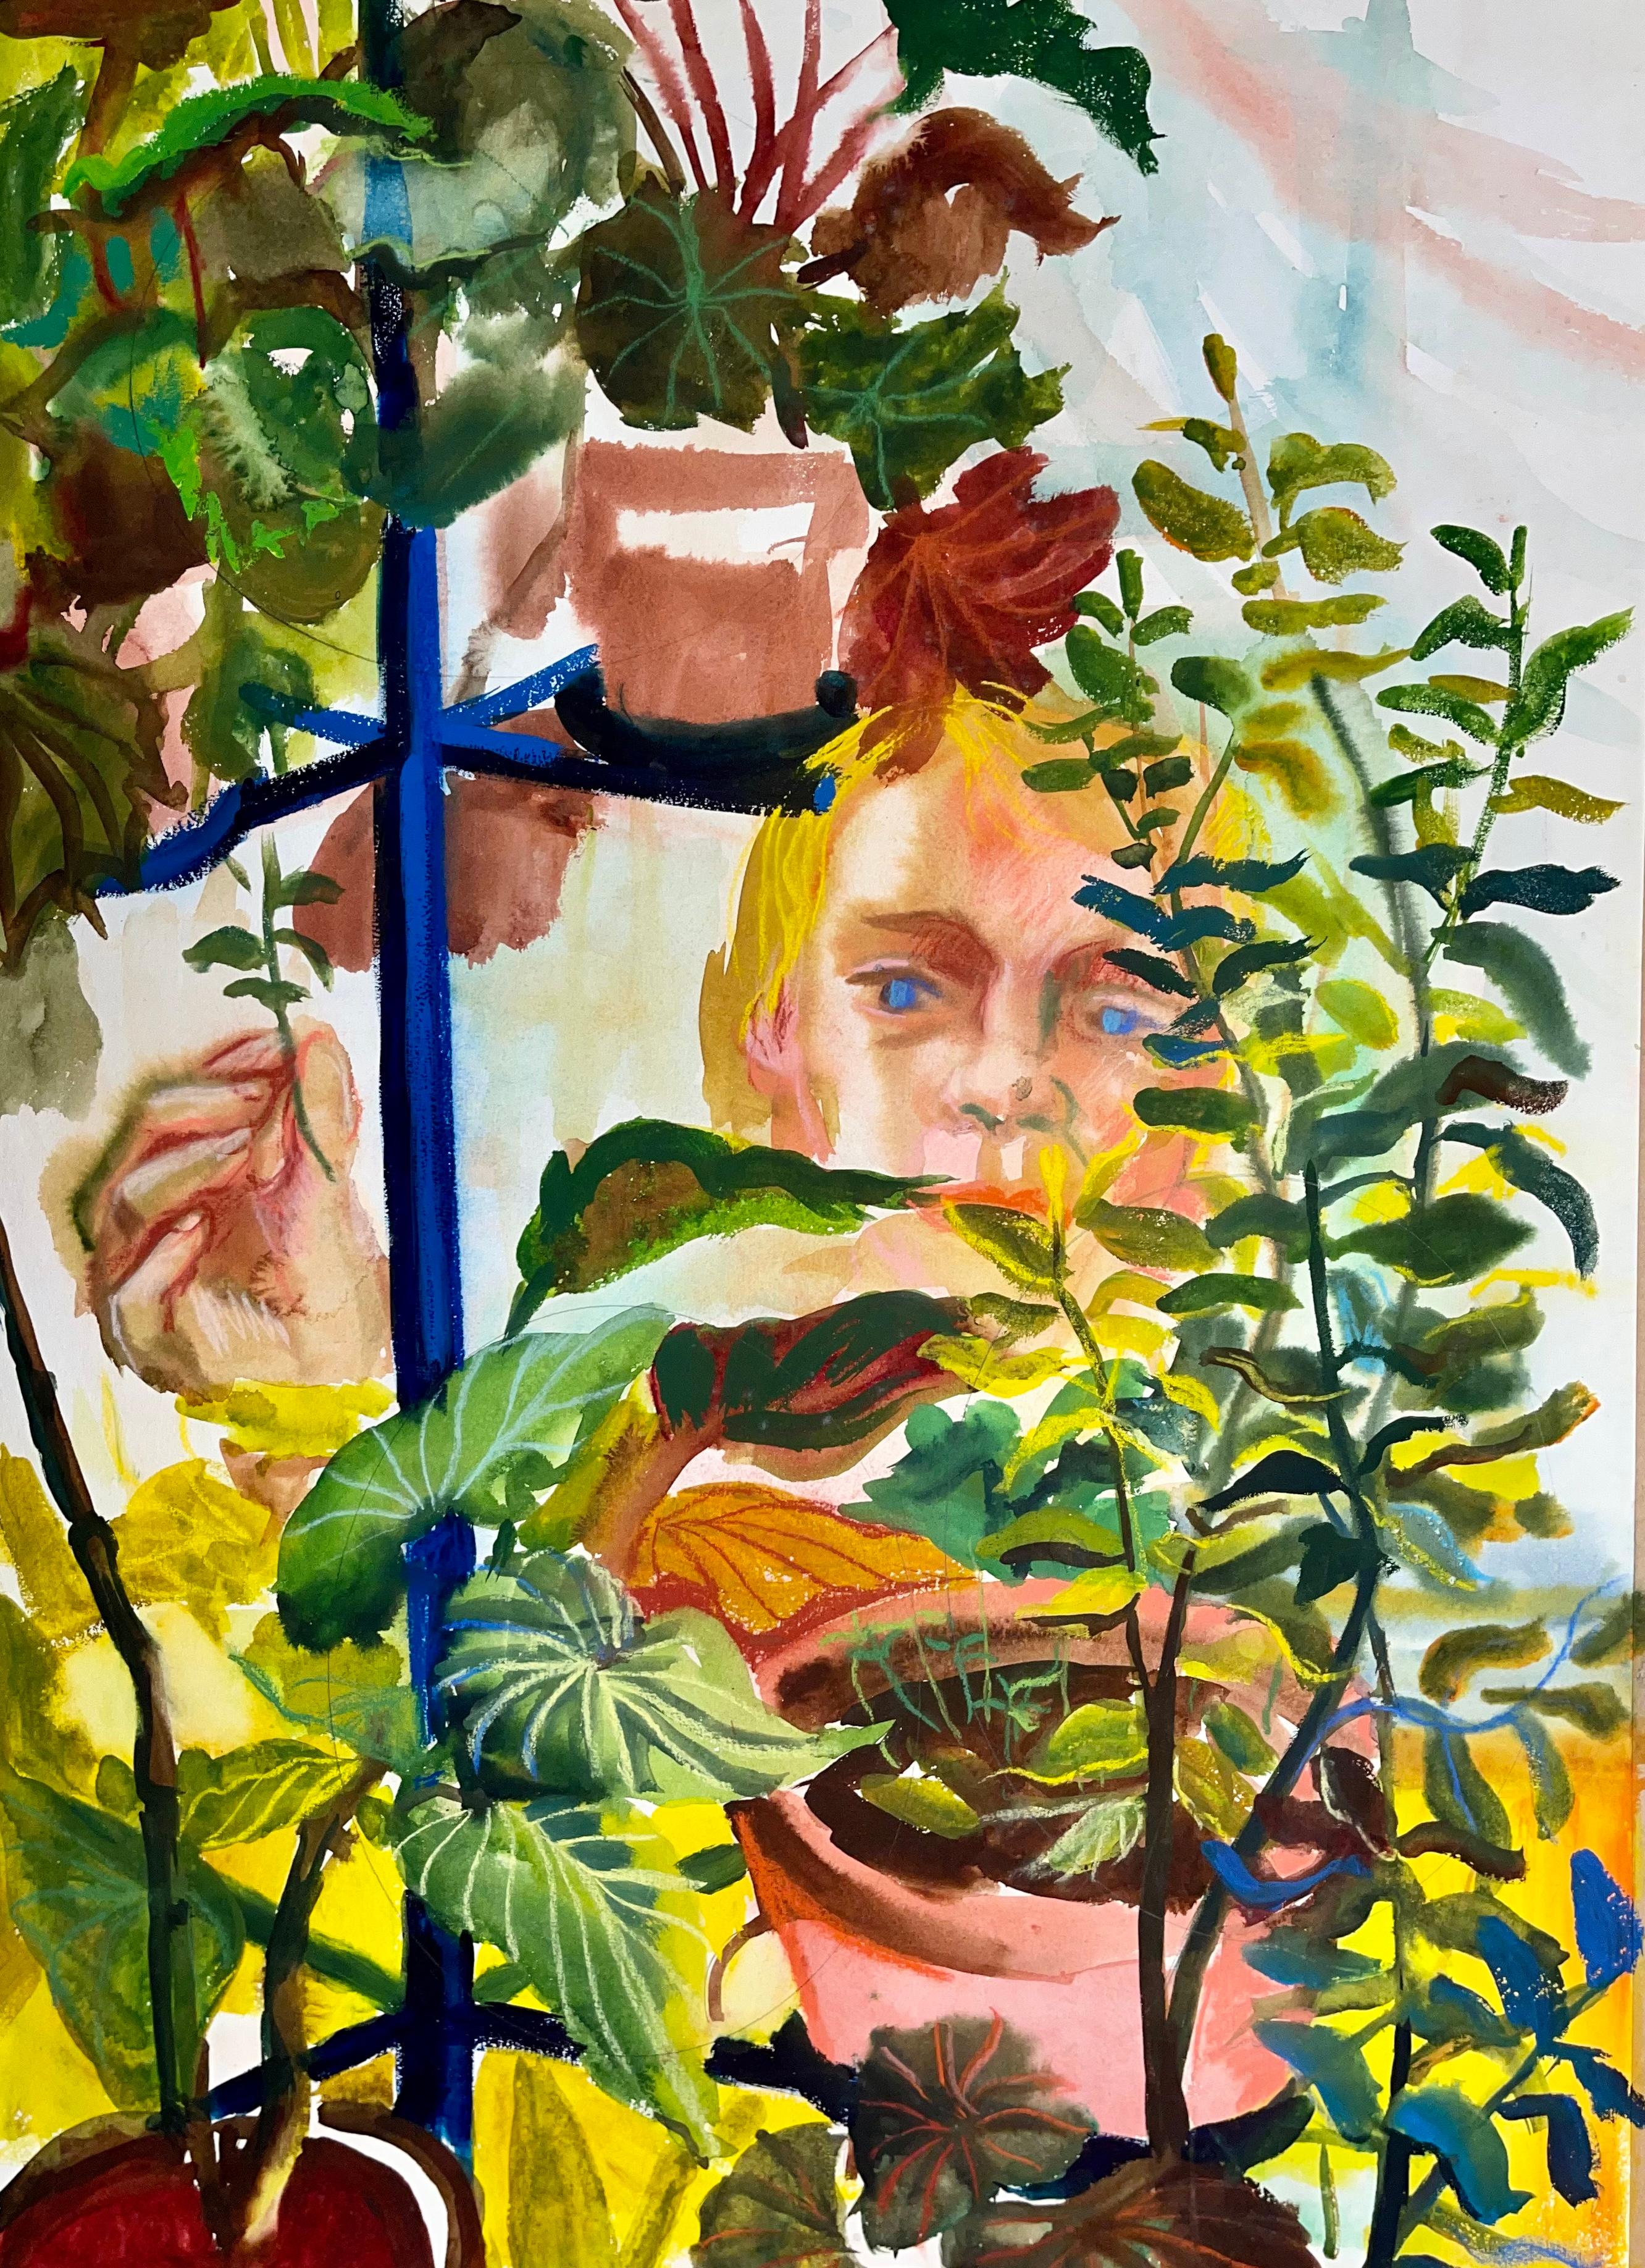 Ian Hornak Interior Painting - Untitled (Abstract Still Life with Figure, Cascading Flowers and Plants)